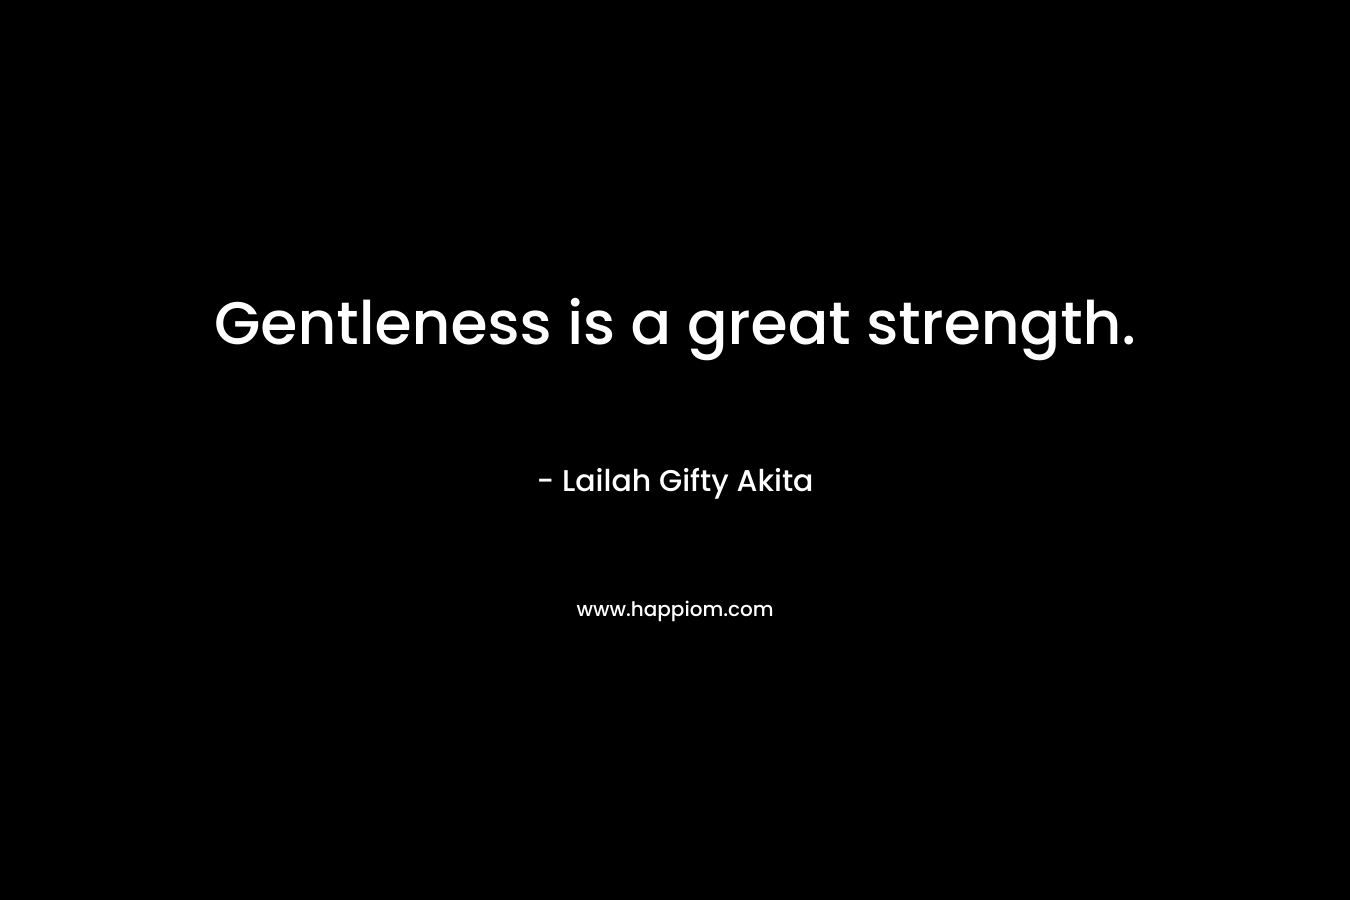 Gentleness is a great strength. – Lailah Gifty Akita